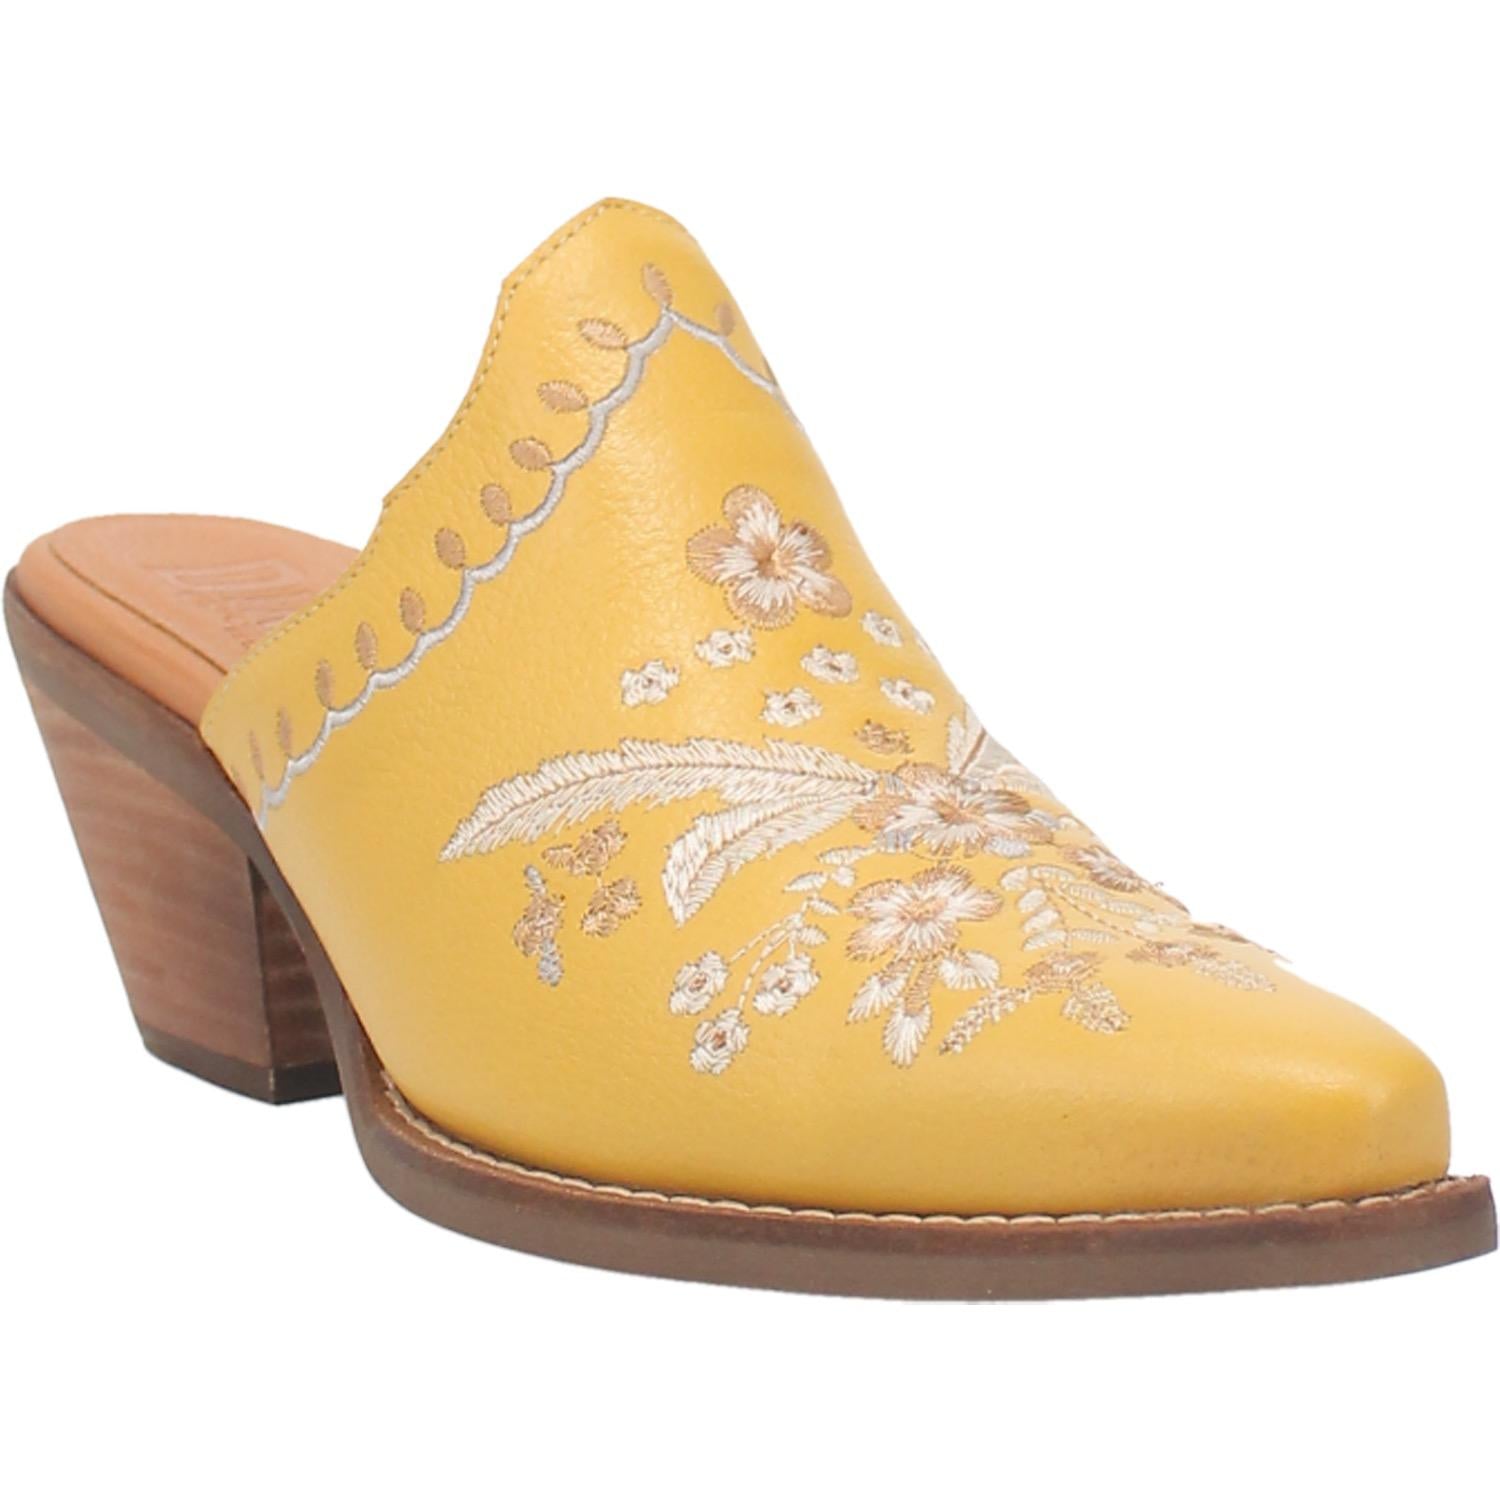 A yellow bootie with a white floral and feather design on the upper, a white stitched design on the edge, and a short heel